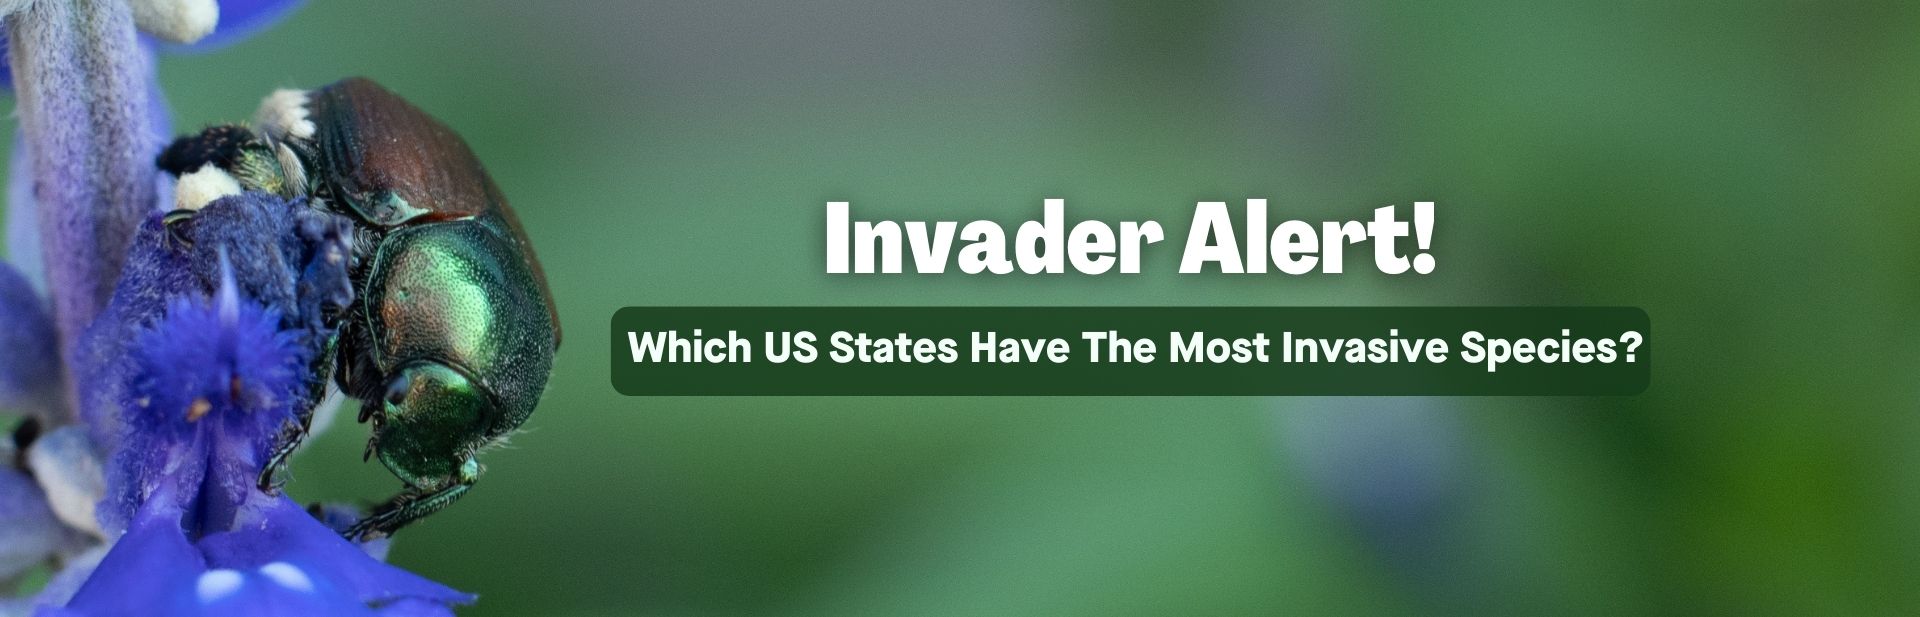 Invader Alert! Which US States Have the Most Invasive Species?